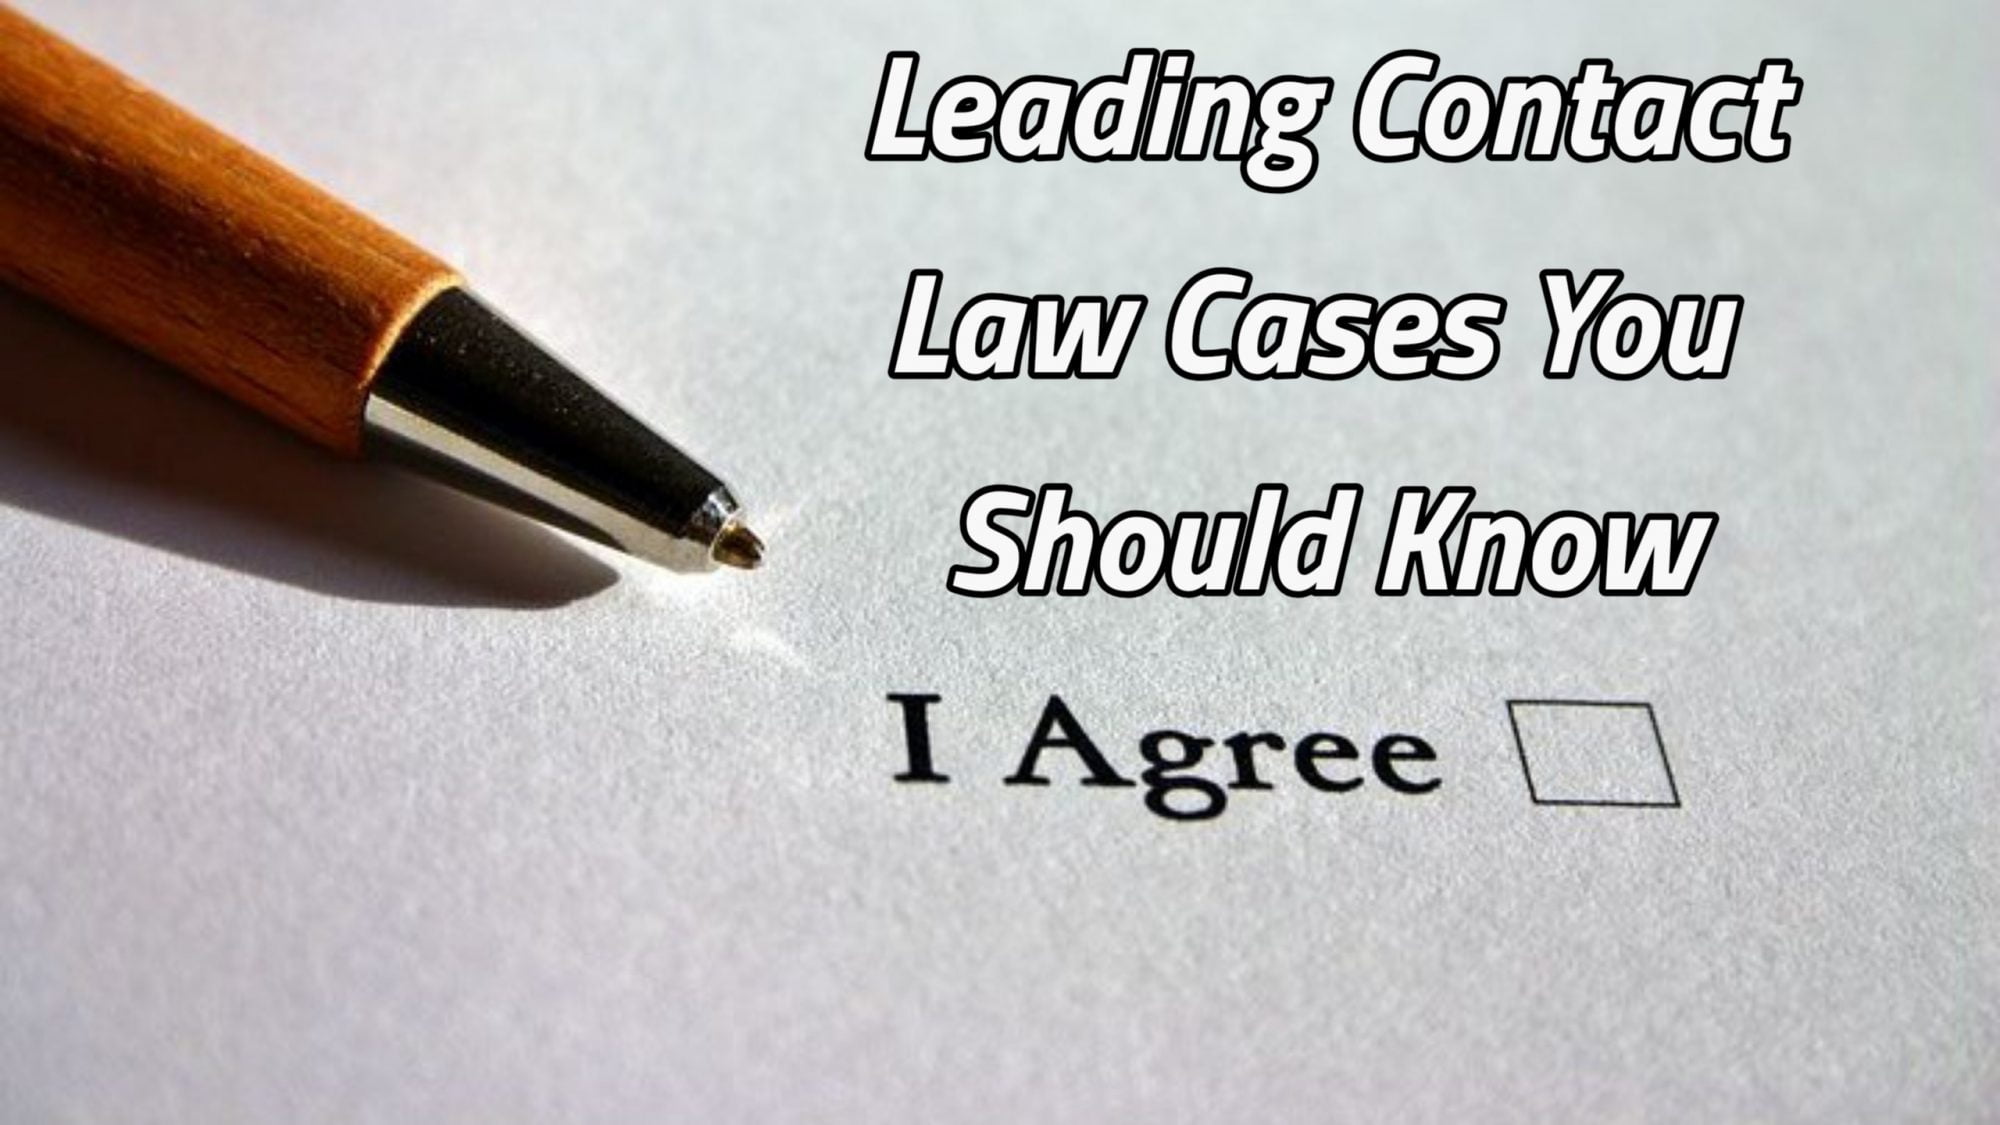 acceptance in contract law cases